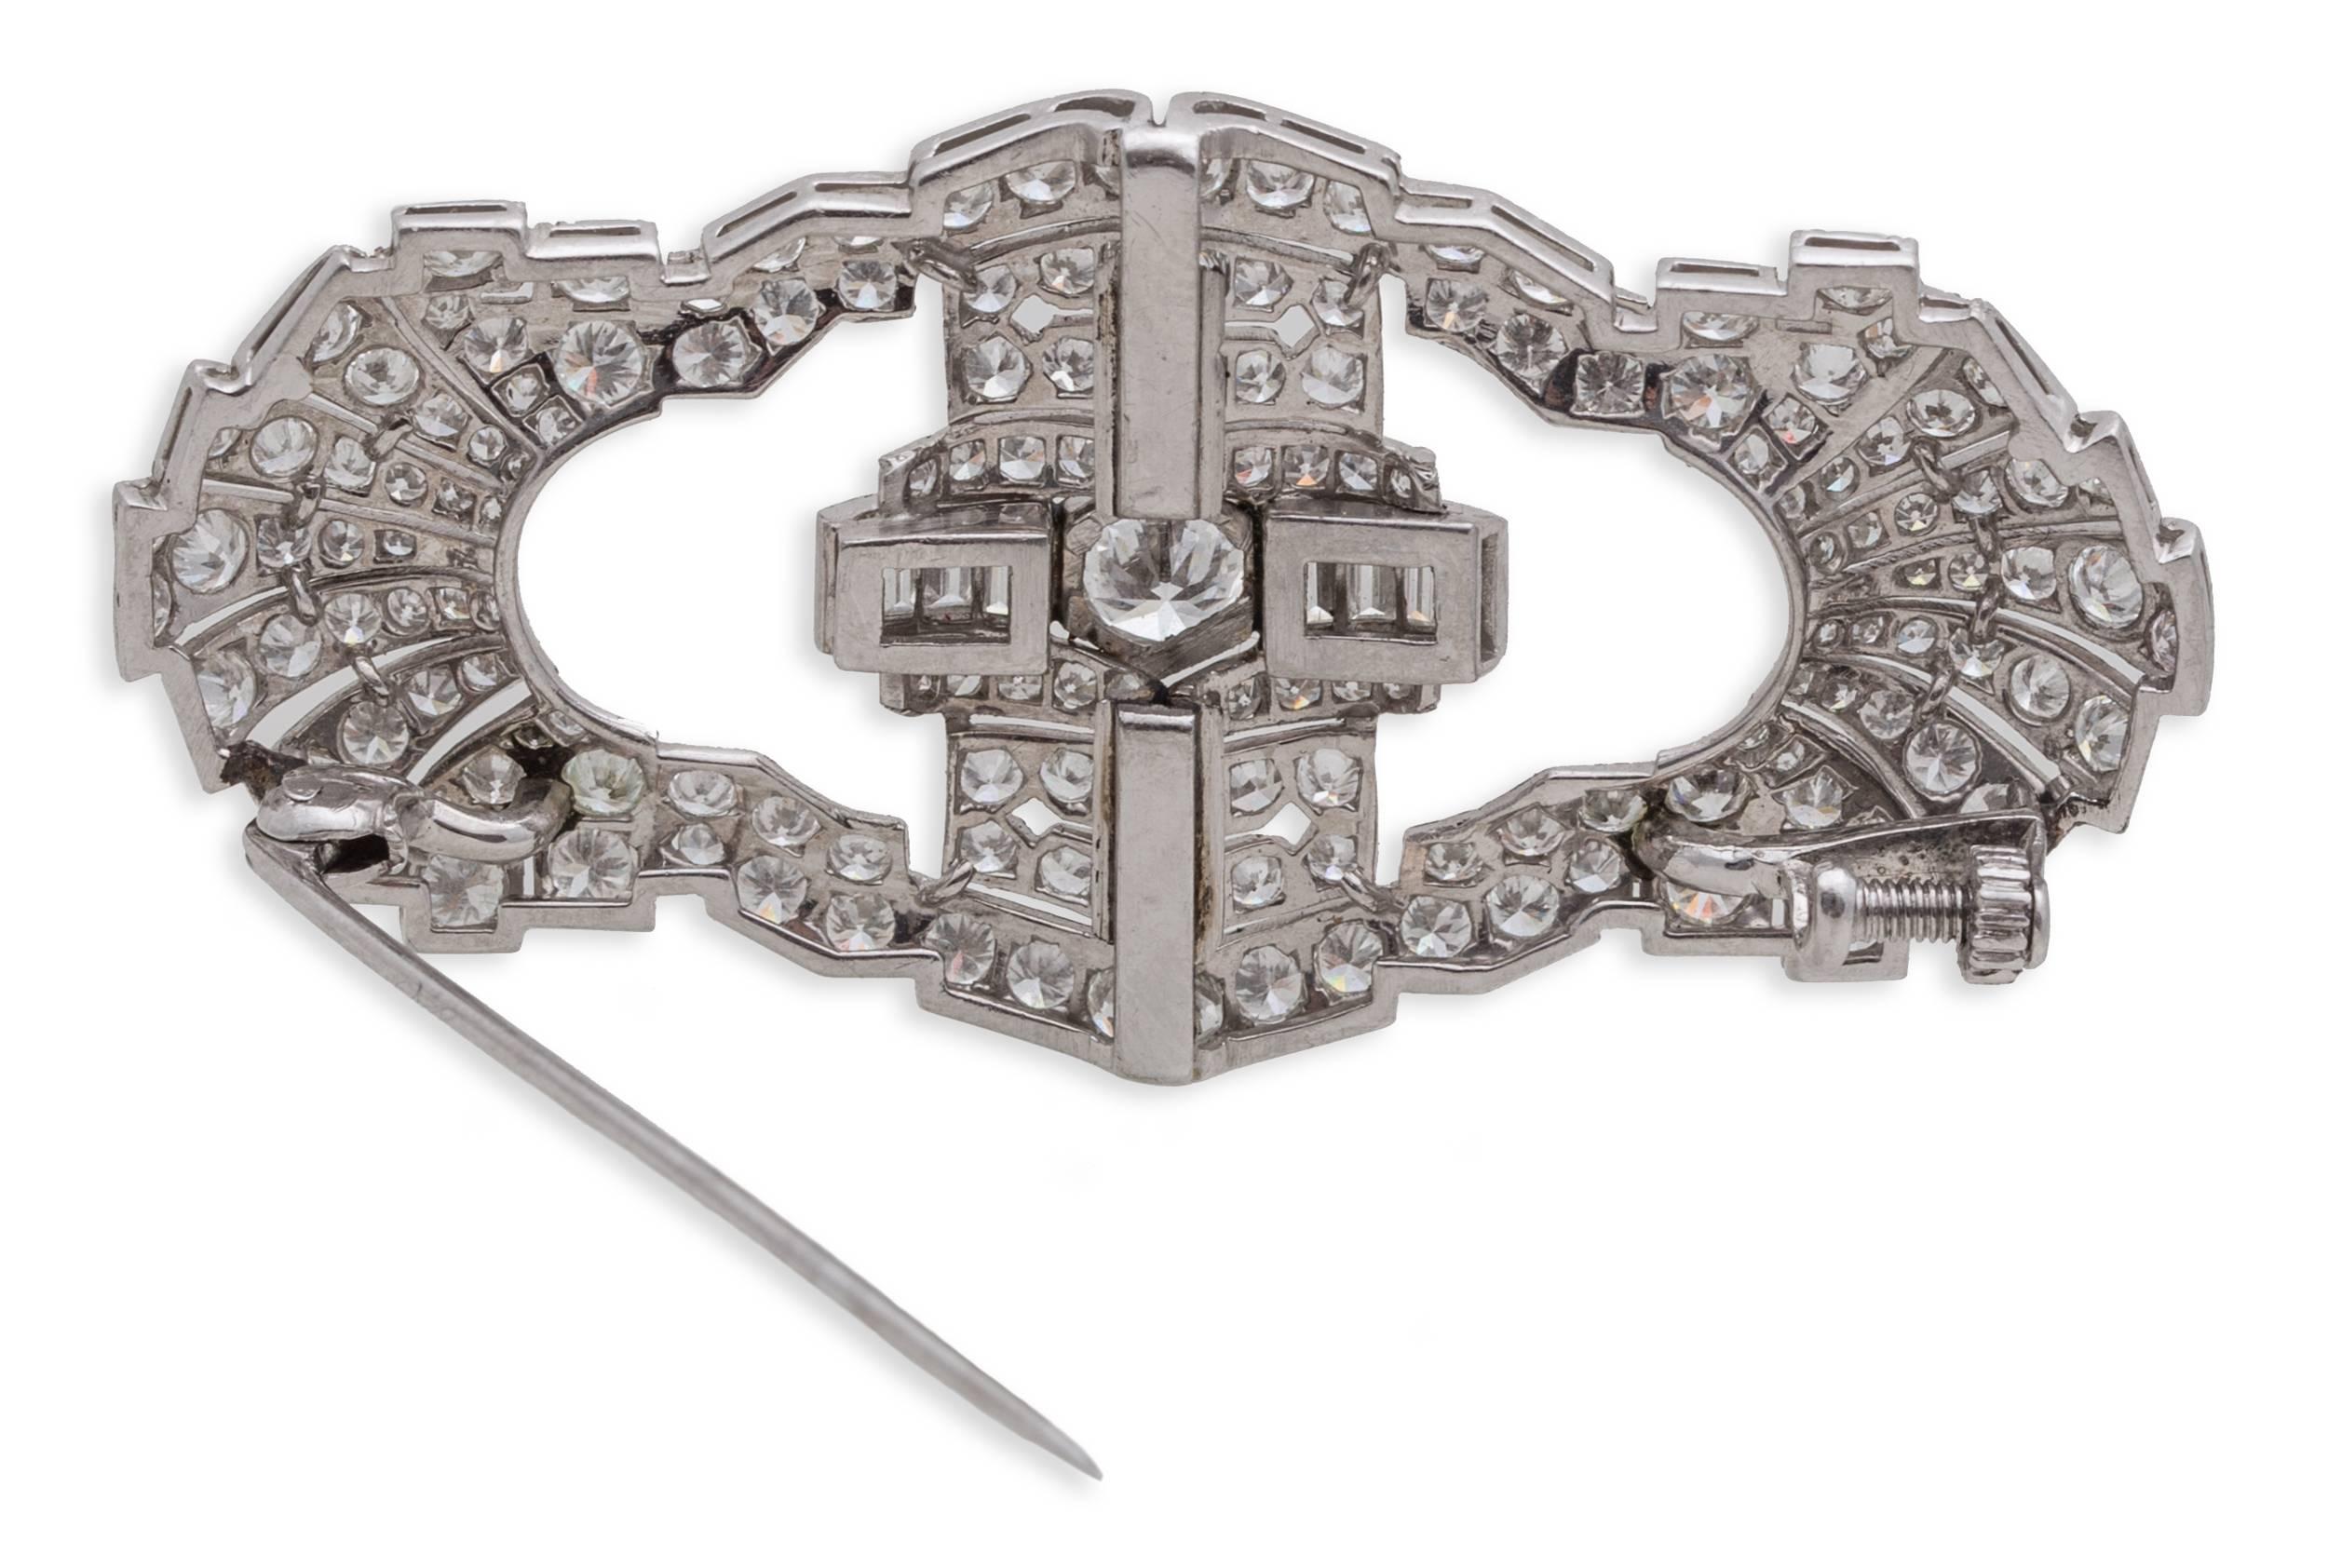 Diamond Art Deco Brooch in Platinum with Round and Baguette Diamonds. Round Center Diamond: 0.90ct., Total Diamond Weight: 9.30ct, Brooch Dimensions: L 2.53